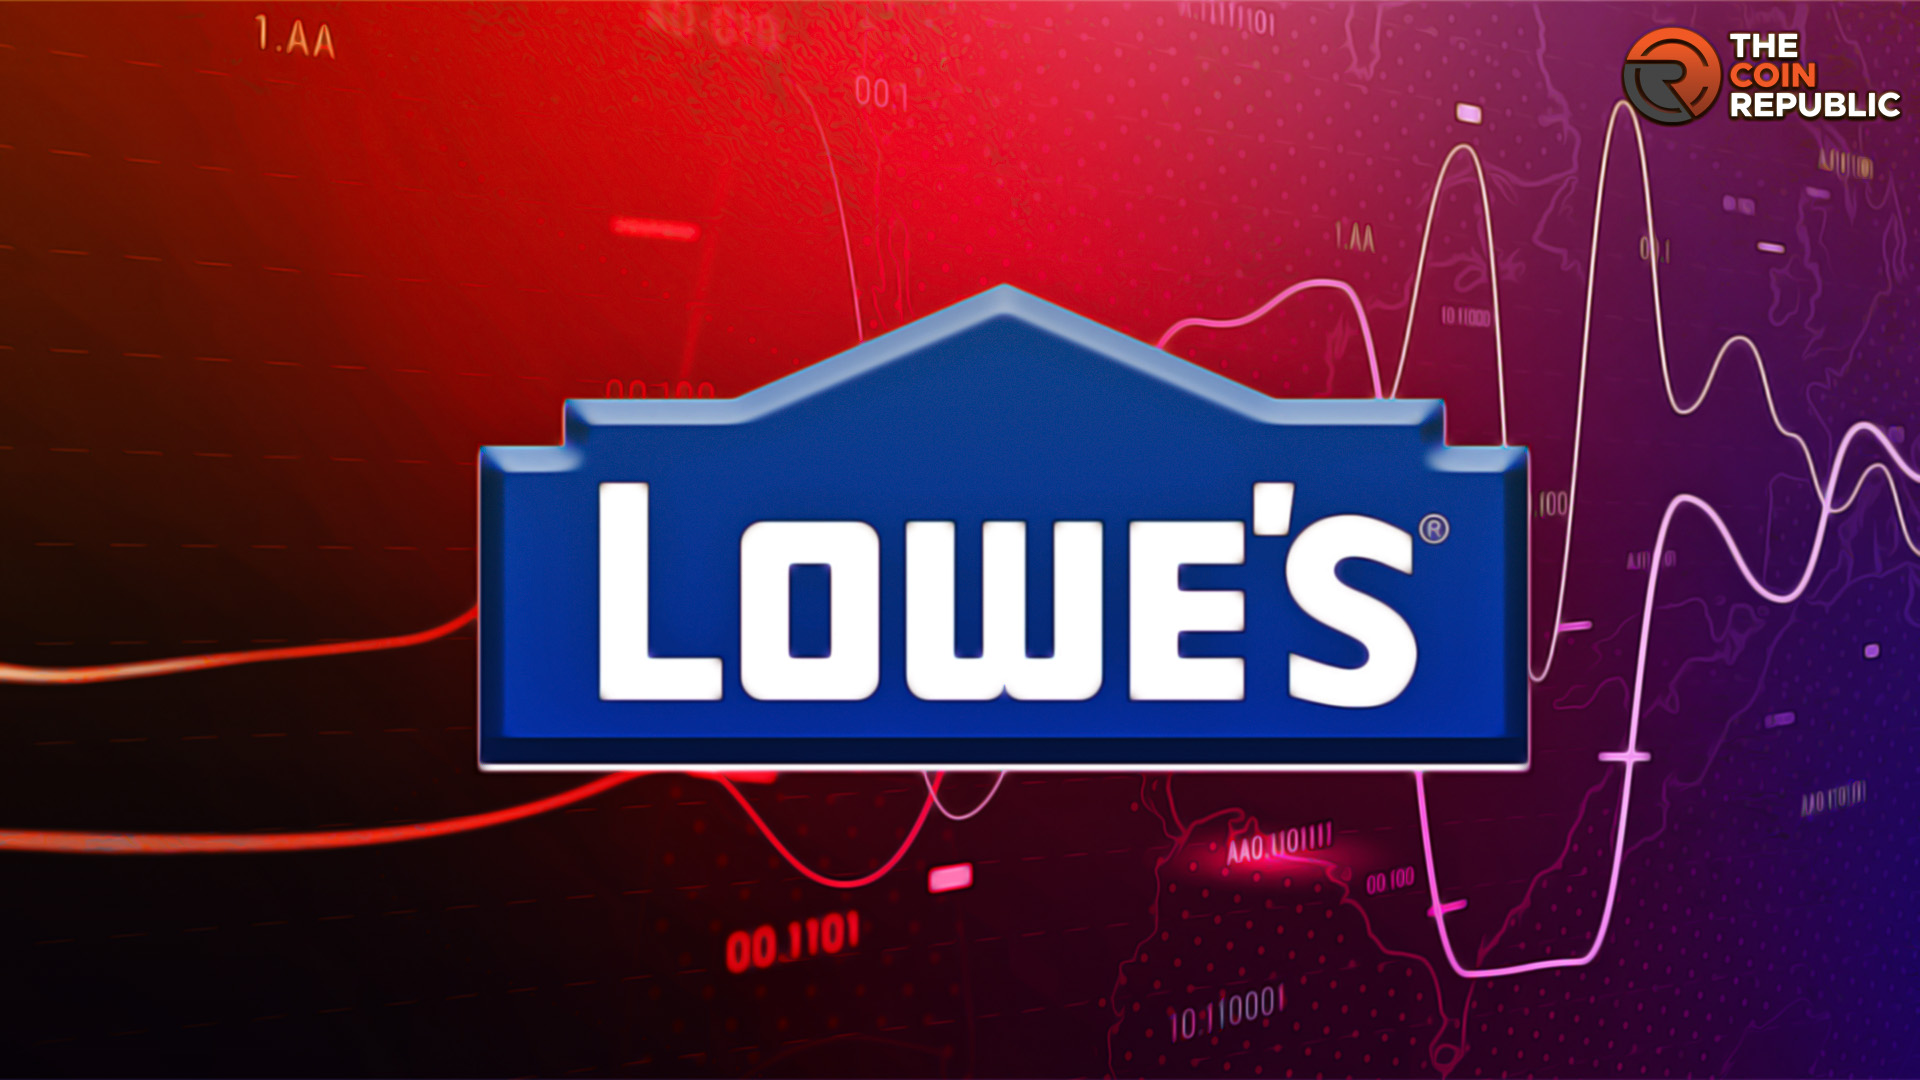 Lowe’s Stock Price Prediction: Will LOW Stock Make the $235 Mark?